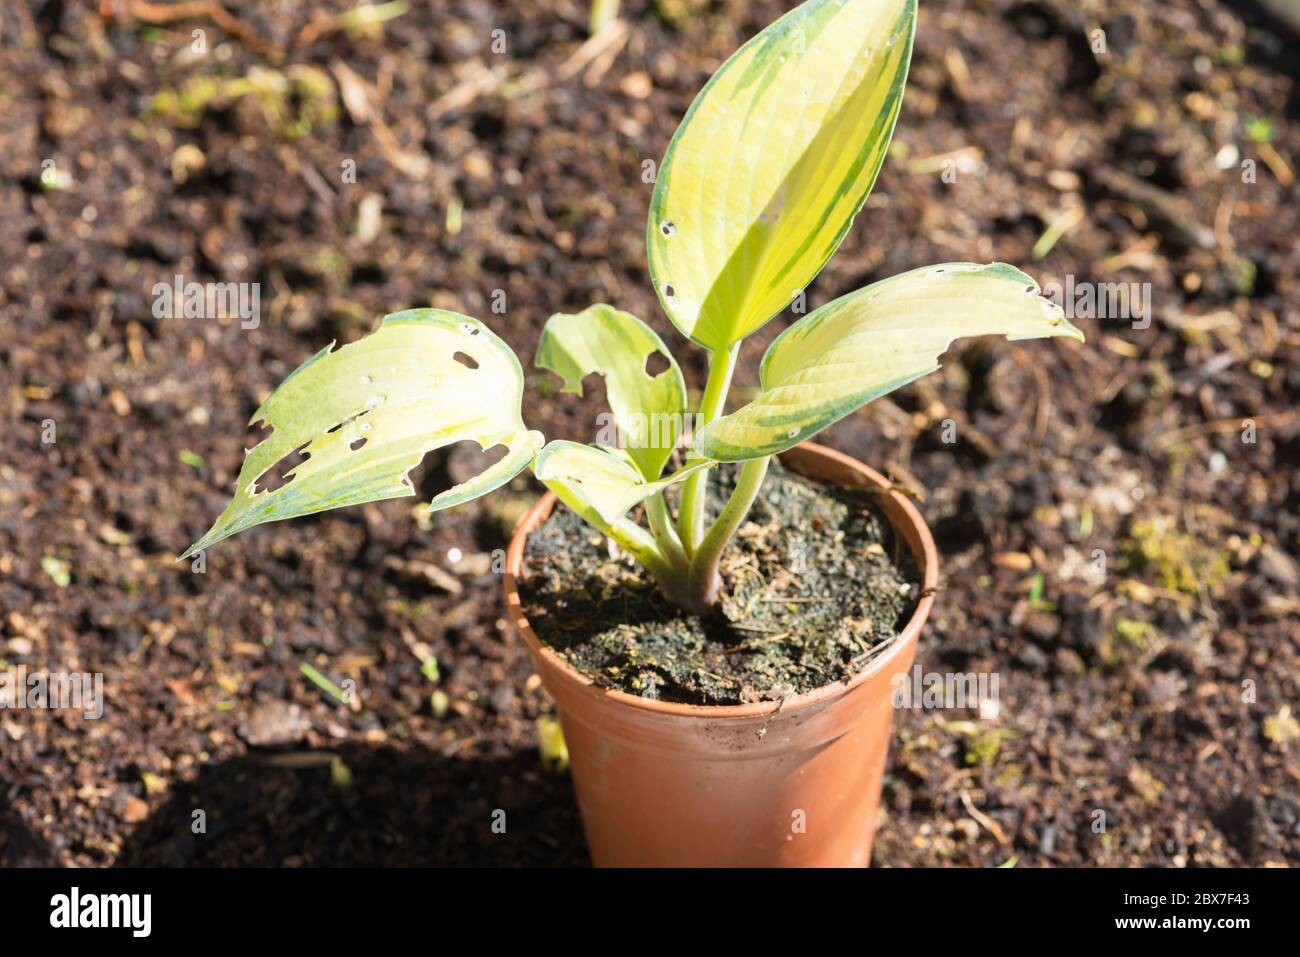 A young Hosta plant with leaves eaten by slugs Stock Photo